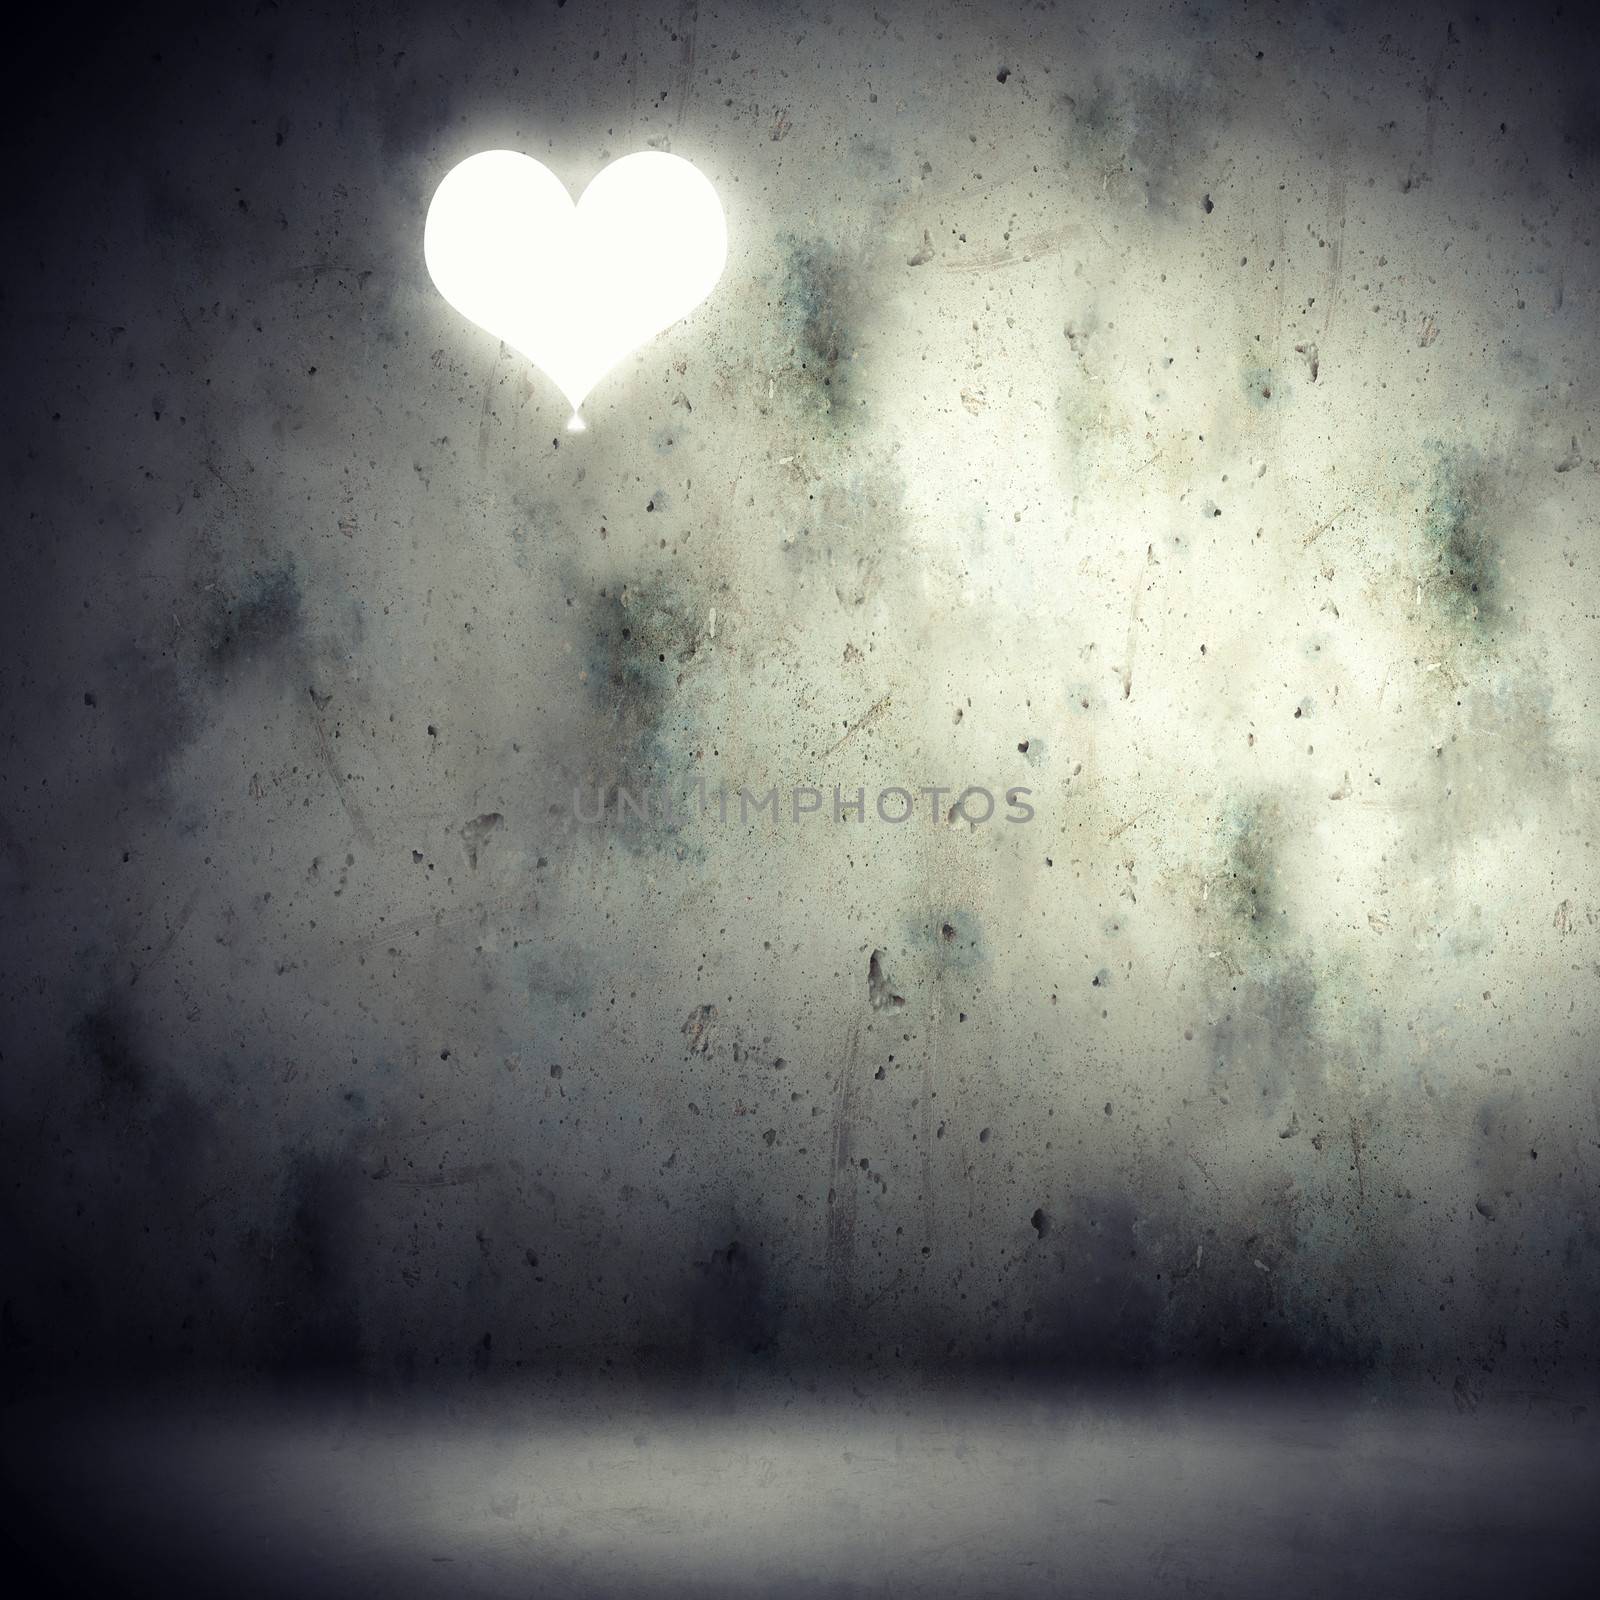 Background image with heart illustration. Love concept